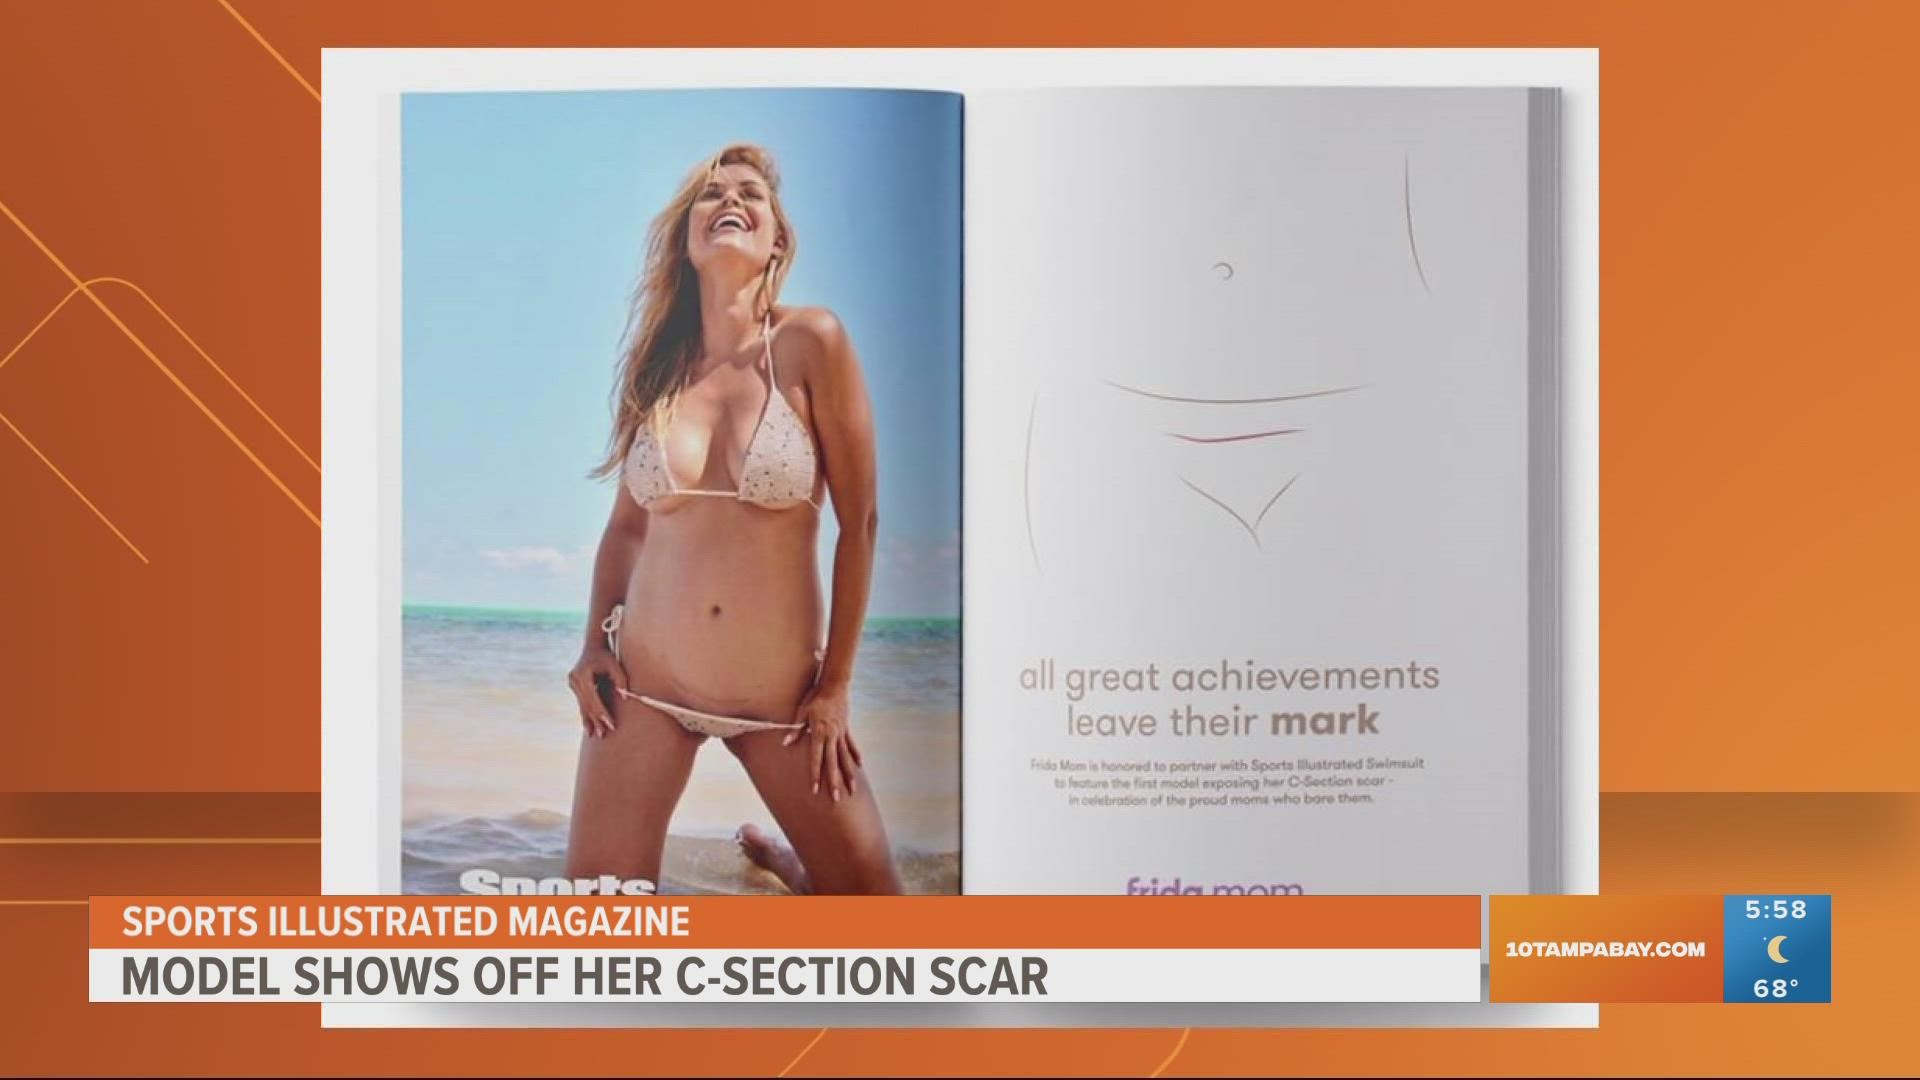 Sports Illustrated models go nude in swimsuit issue (but cover up